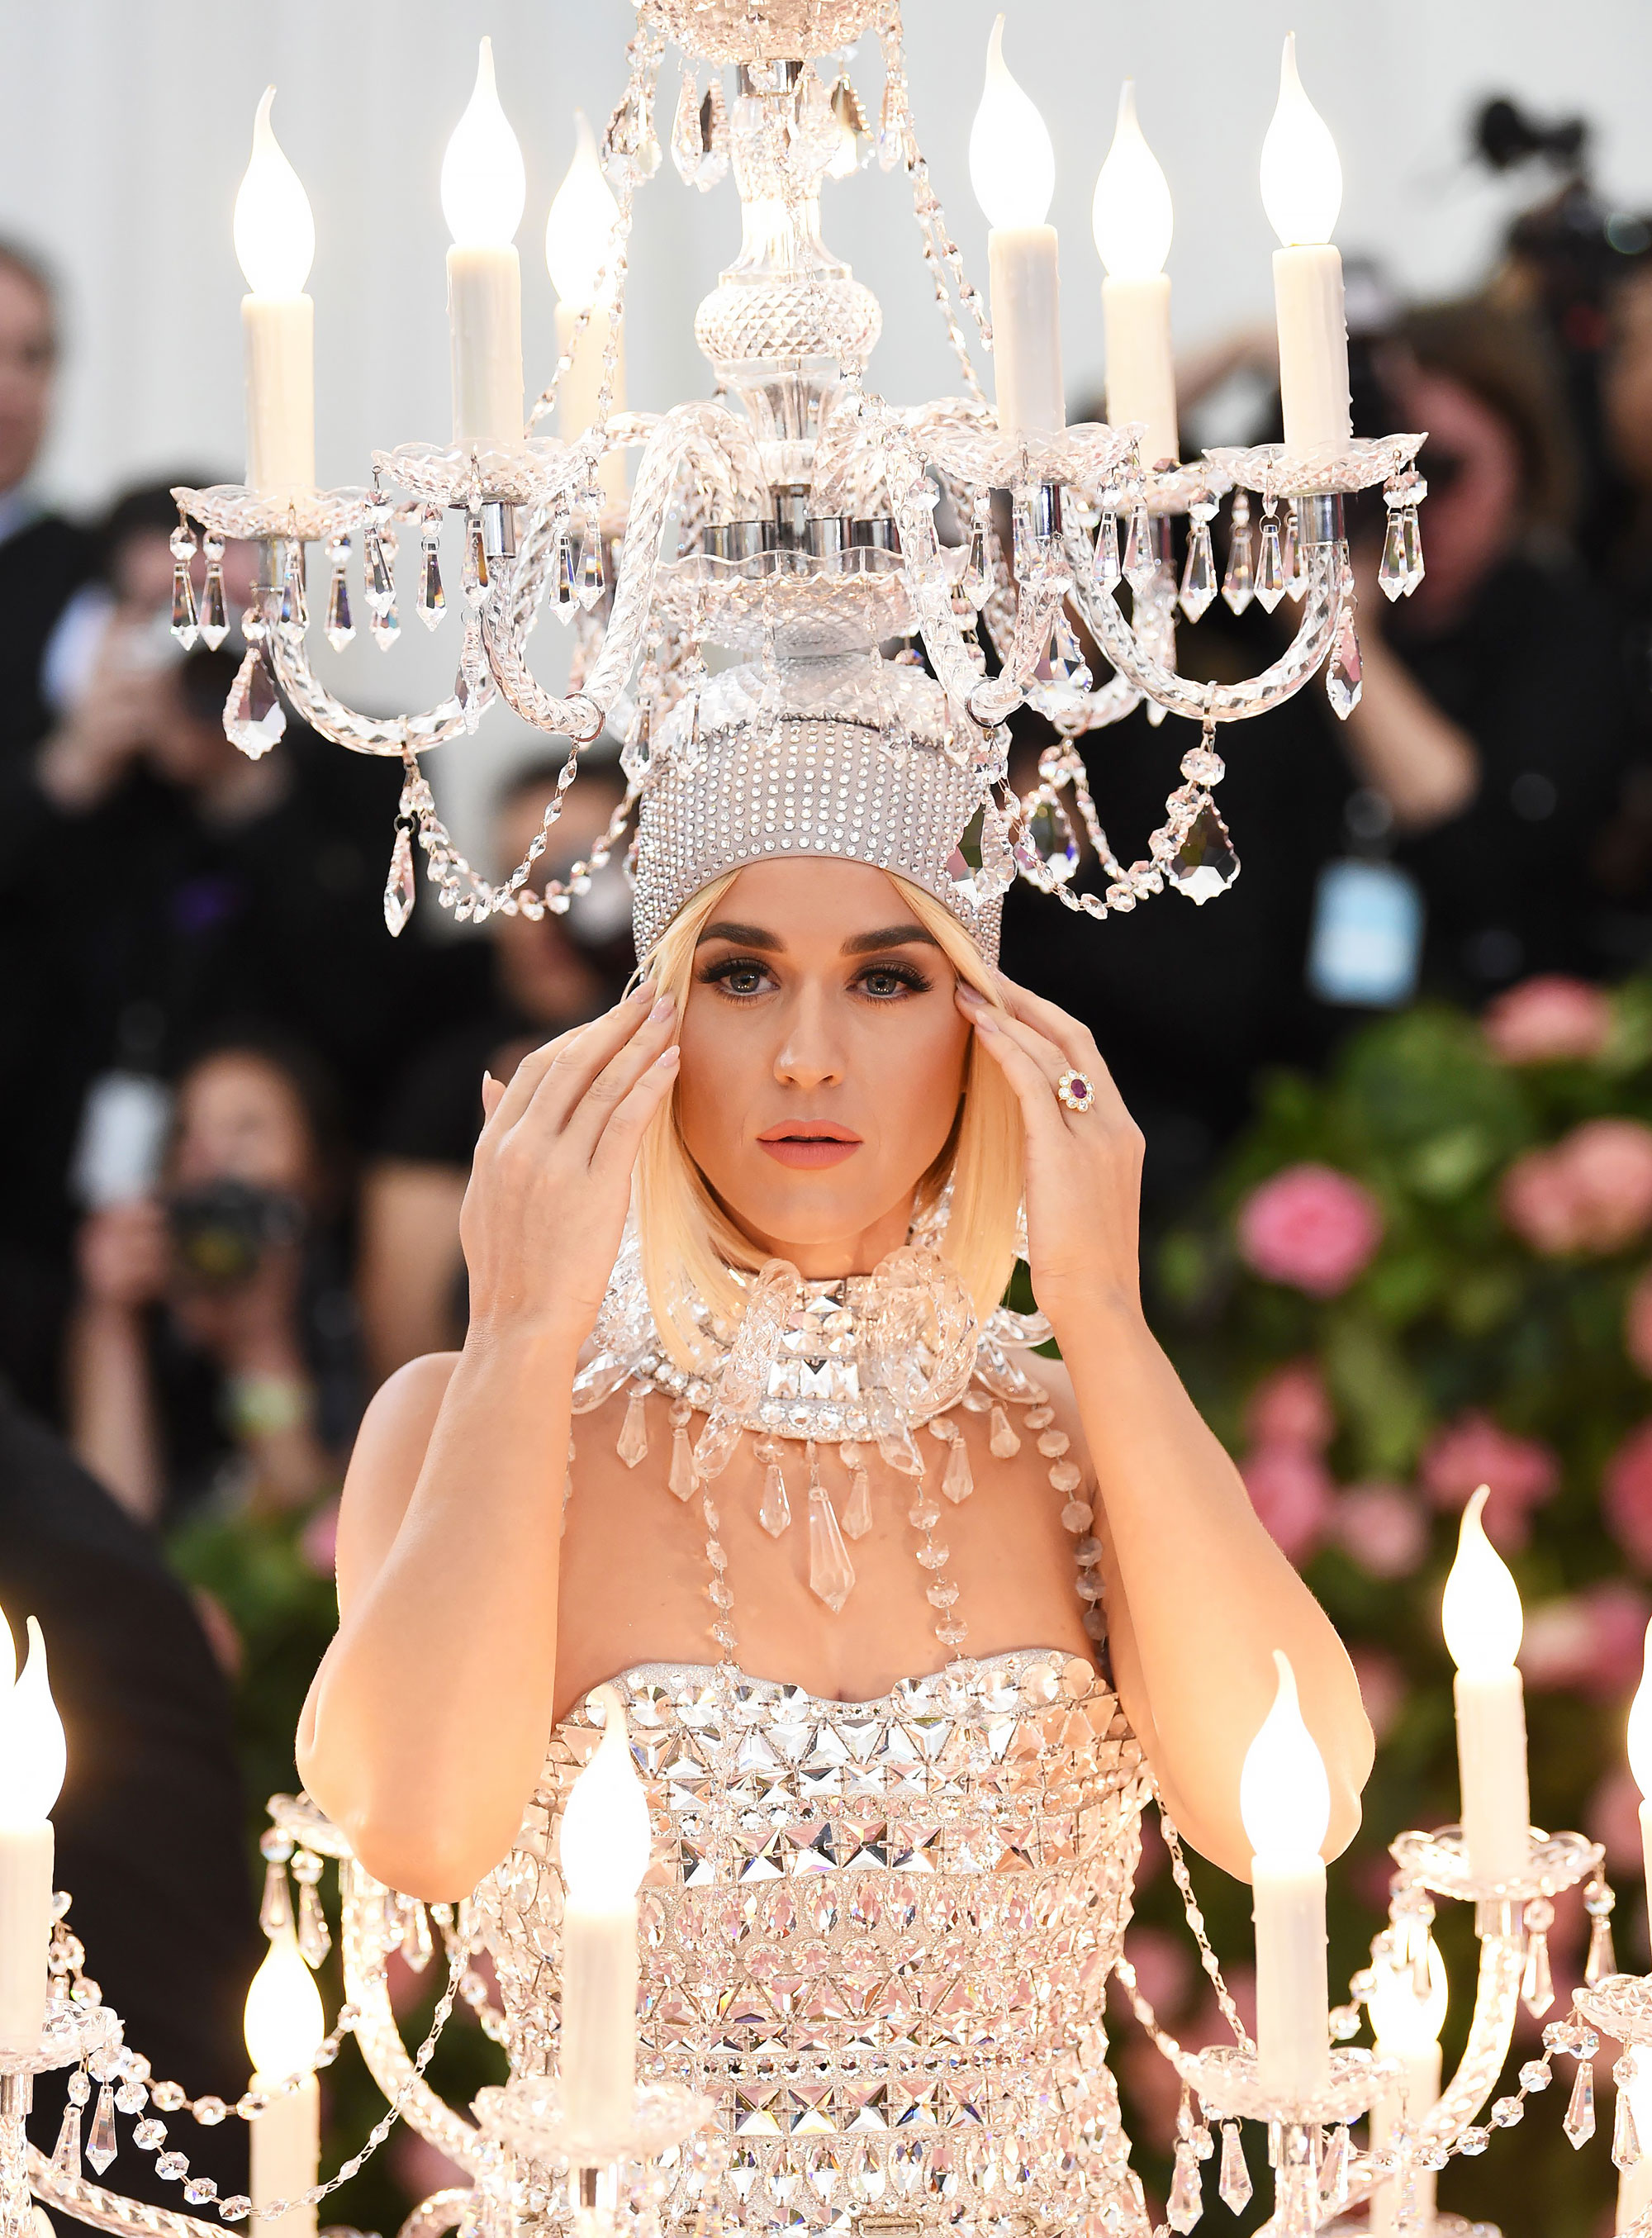 Chandelier Hats! Smurfette Dresses! Katy Perry's Craziest Style Moments  Through the Years | Us Weekly